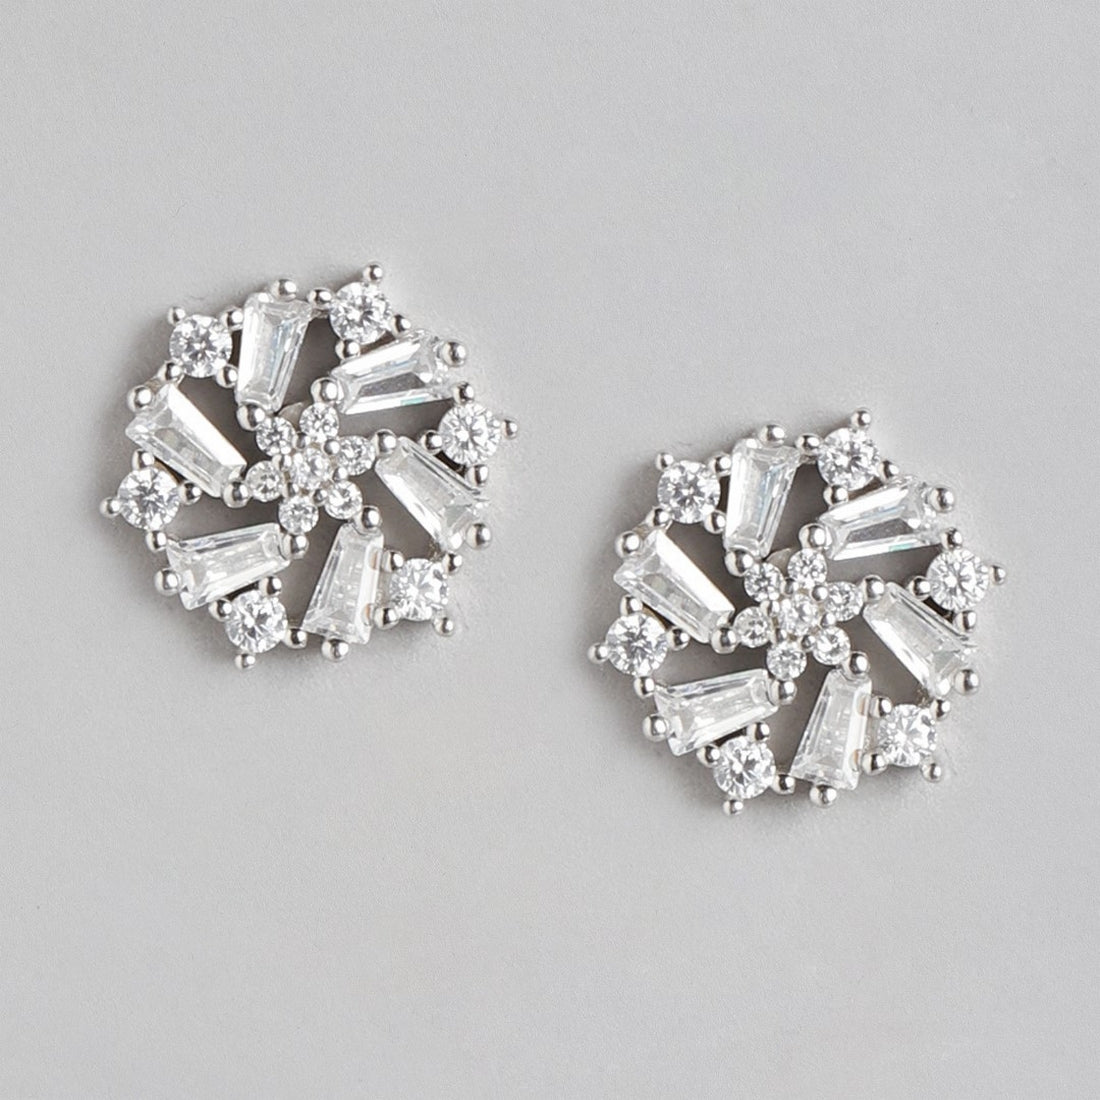 Floral Elegance Rhodium-Plated CZ 925 Sterling Silver Women's Earrings